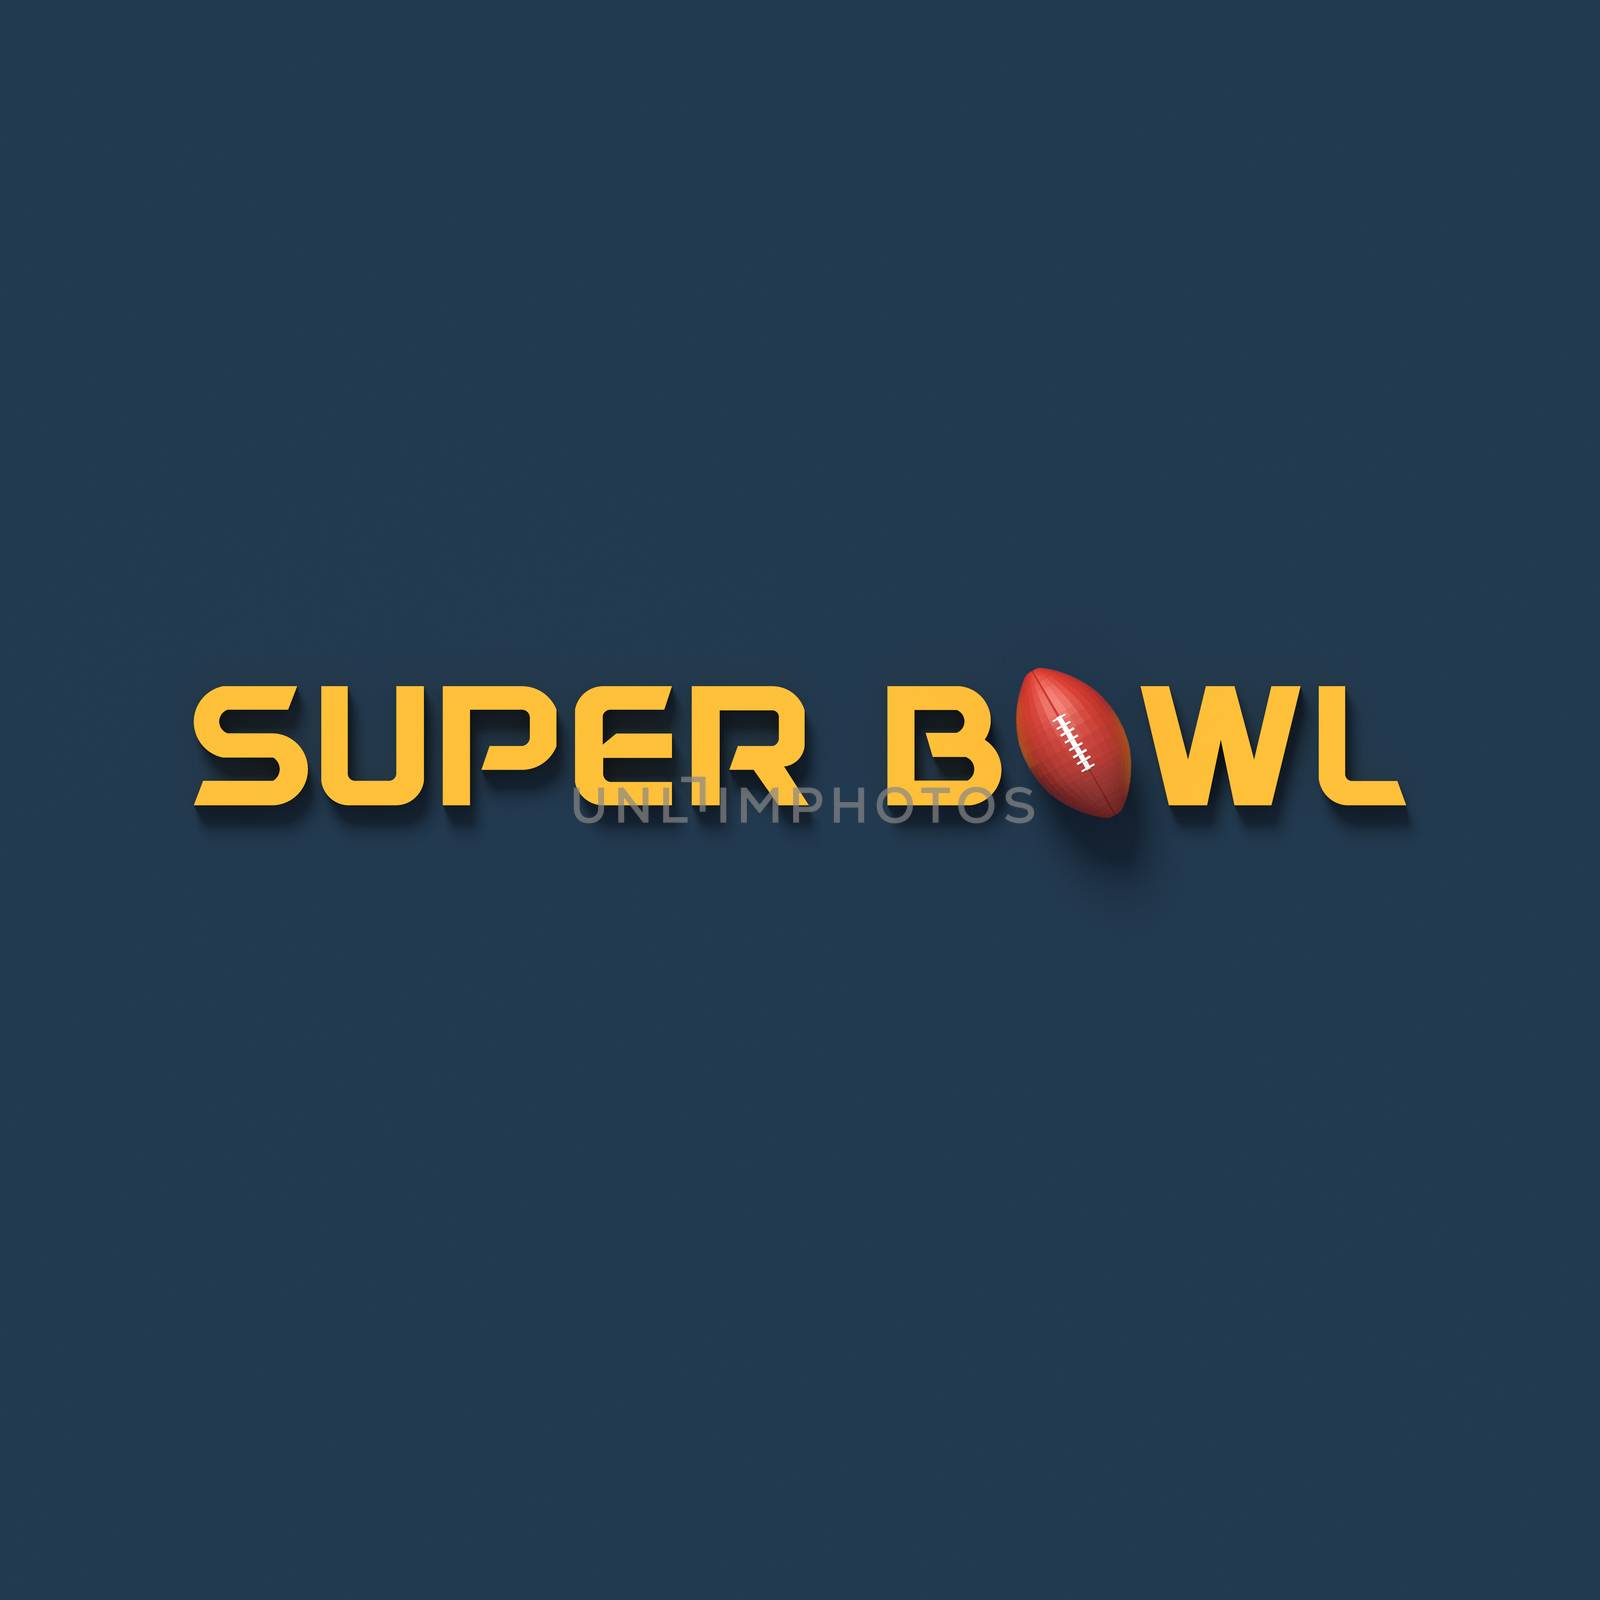 COLOR PHOTO OF 3D RENDERING WORDS 'SUPER BOWL' AND RUGBY BALL ON PLAIN BACKGROUND